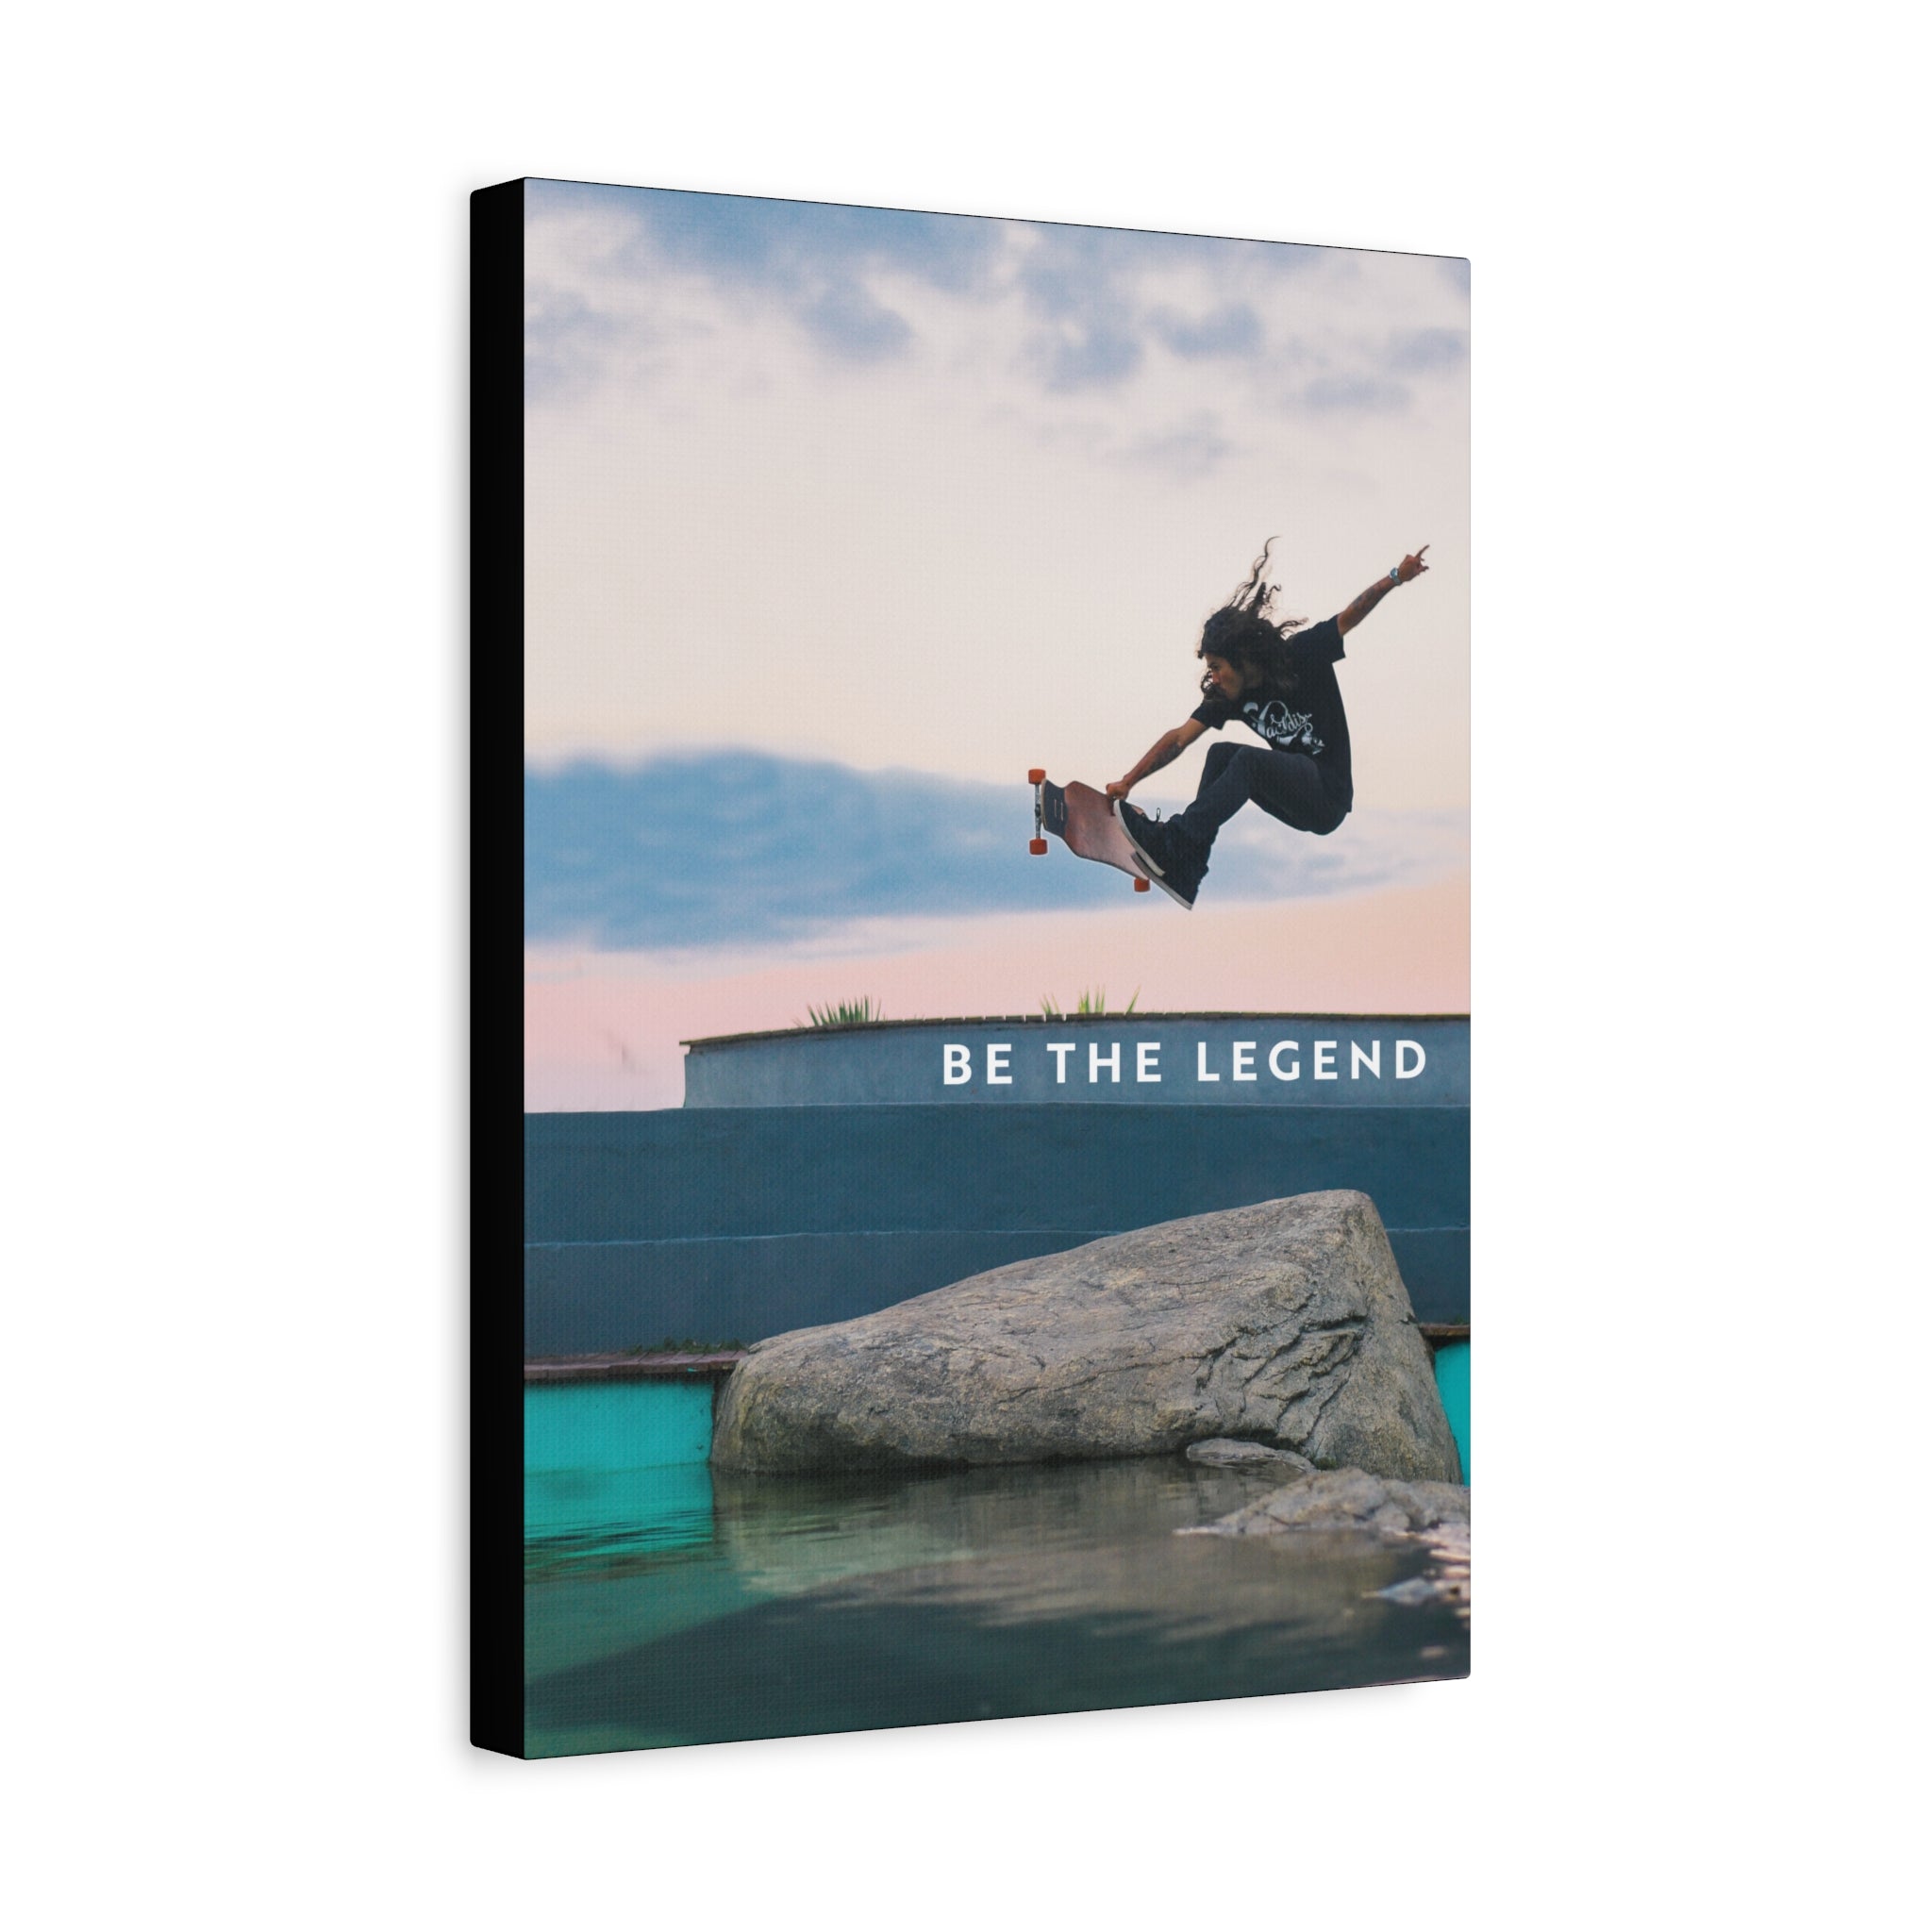 Be The Legend - Rip It - Wall Art additional image 2